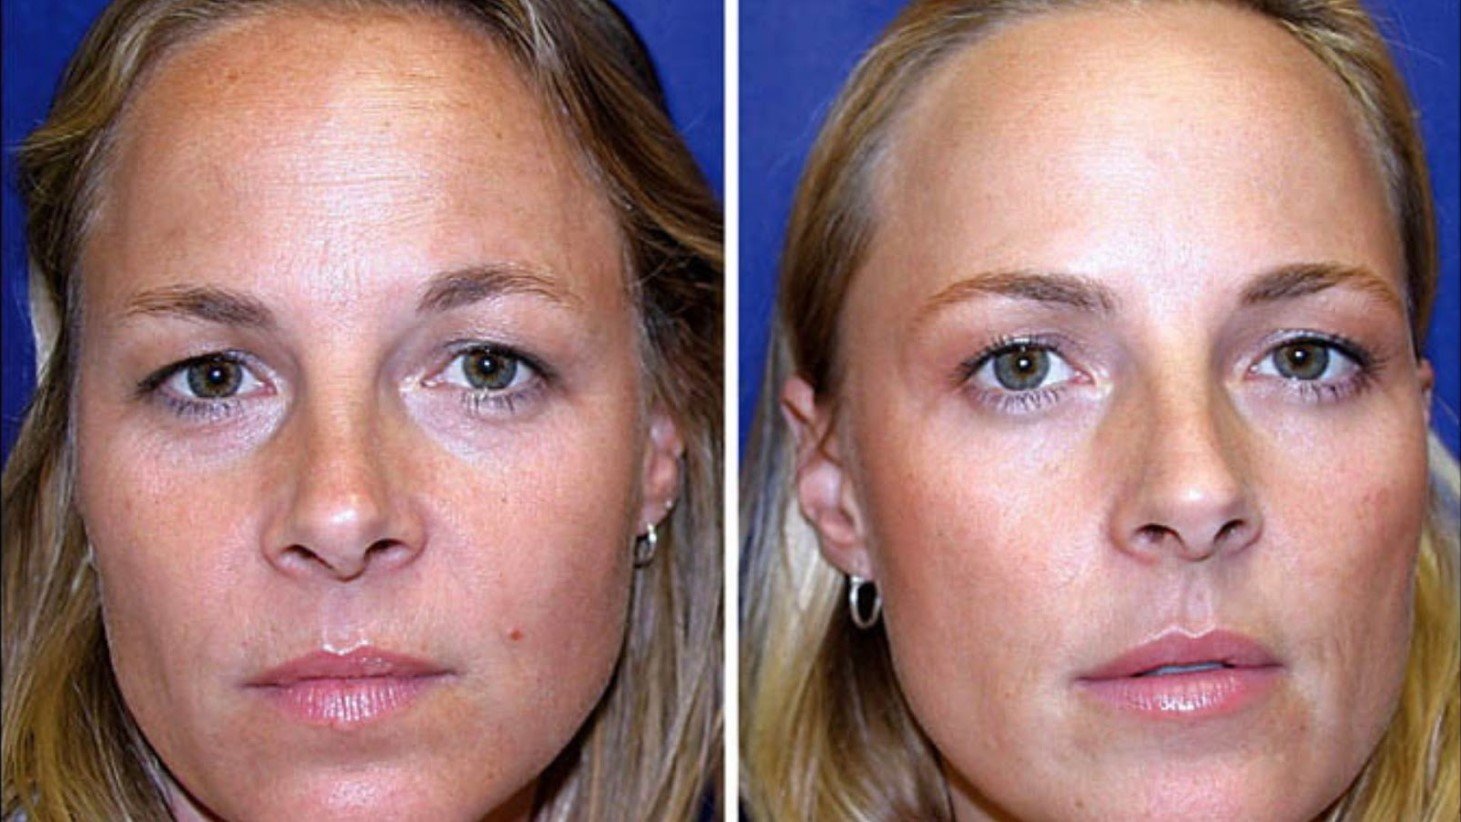 Side-by-side images of two identical female twins' faces against a blue background. The twin on the left shows visible signs of aging, such as fine lines around the eyes and mouth, while the twin on the right has a smoother complexion with fewer wrinkles, suggesting the effects of Botox treatments